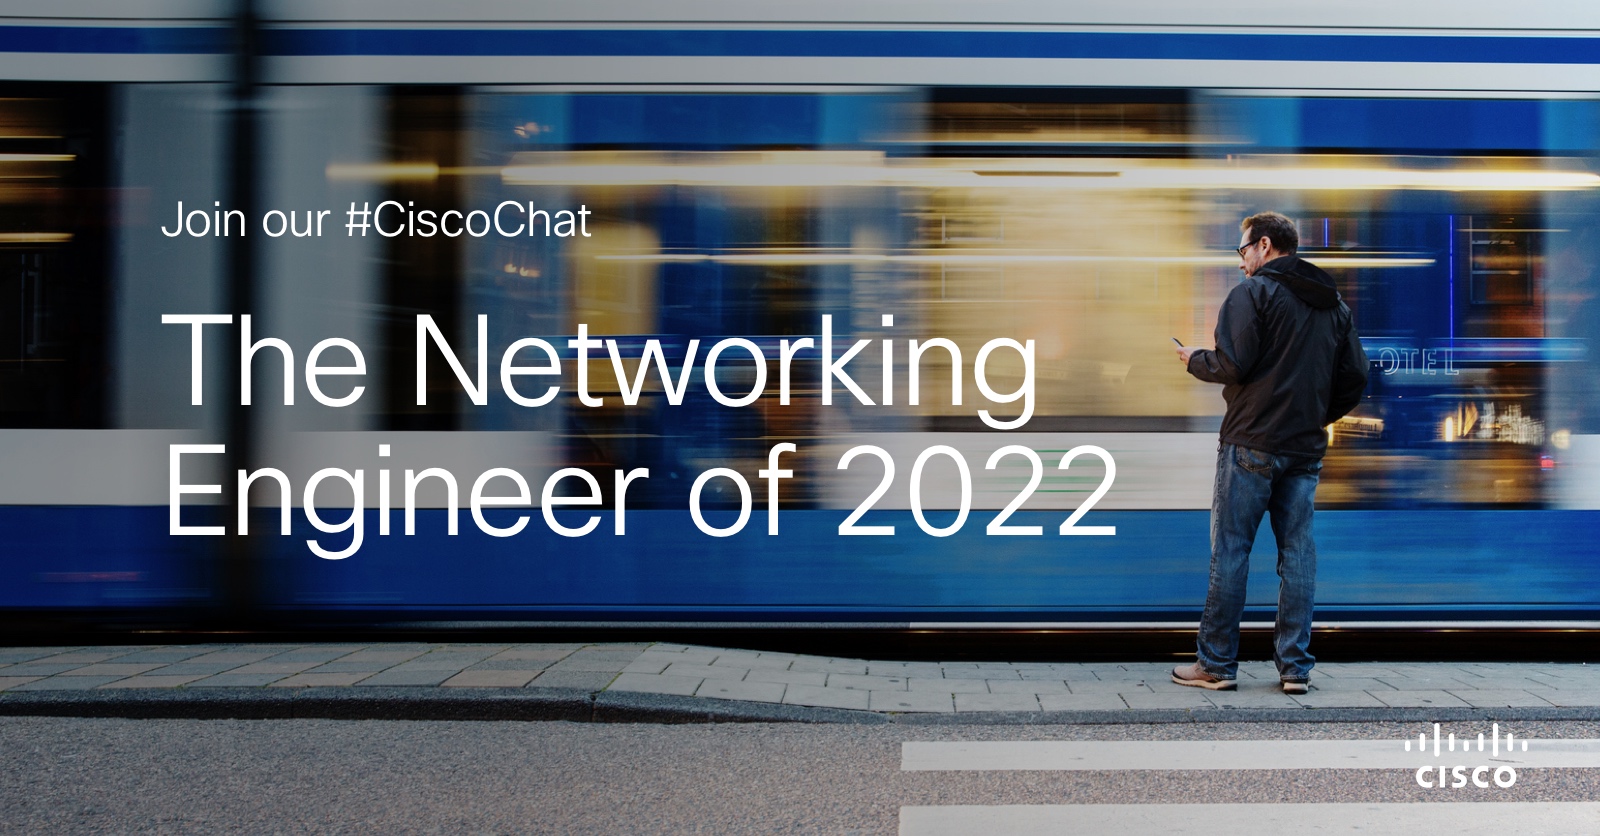 #CiscoChat Live June 28: The Networking Engineer of 2022